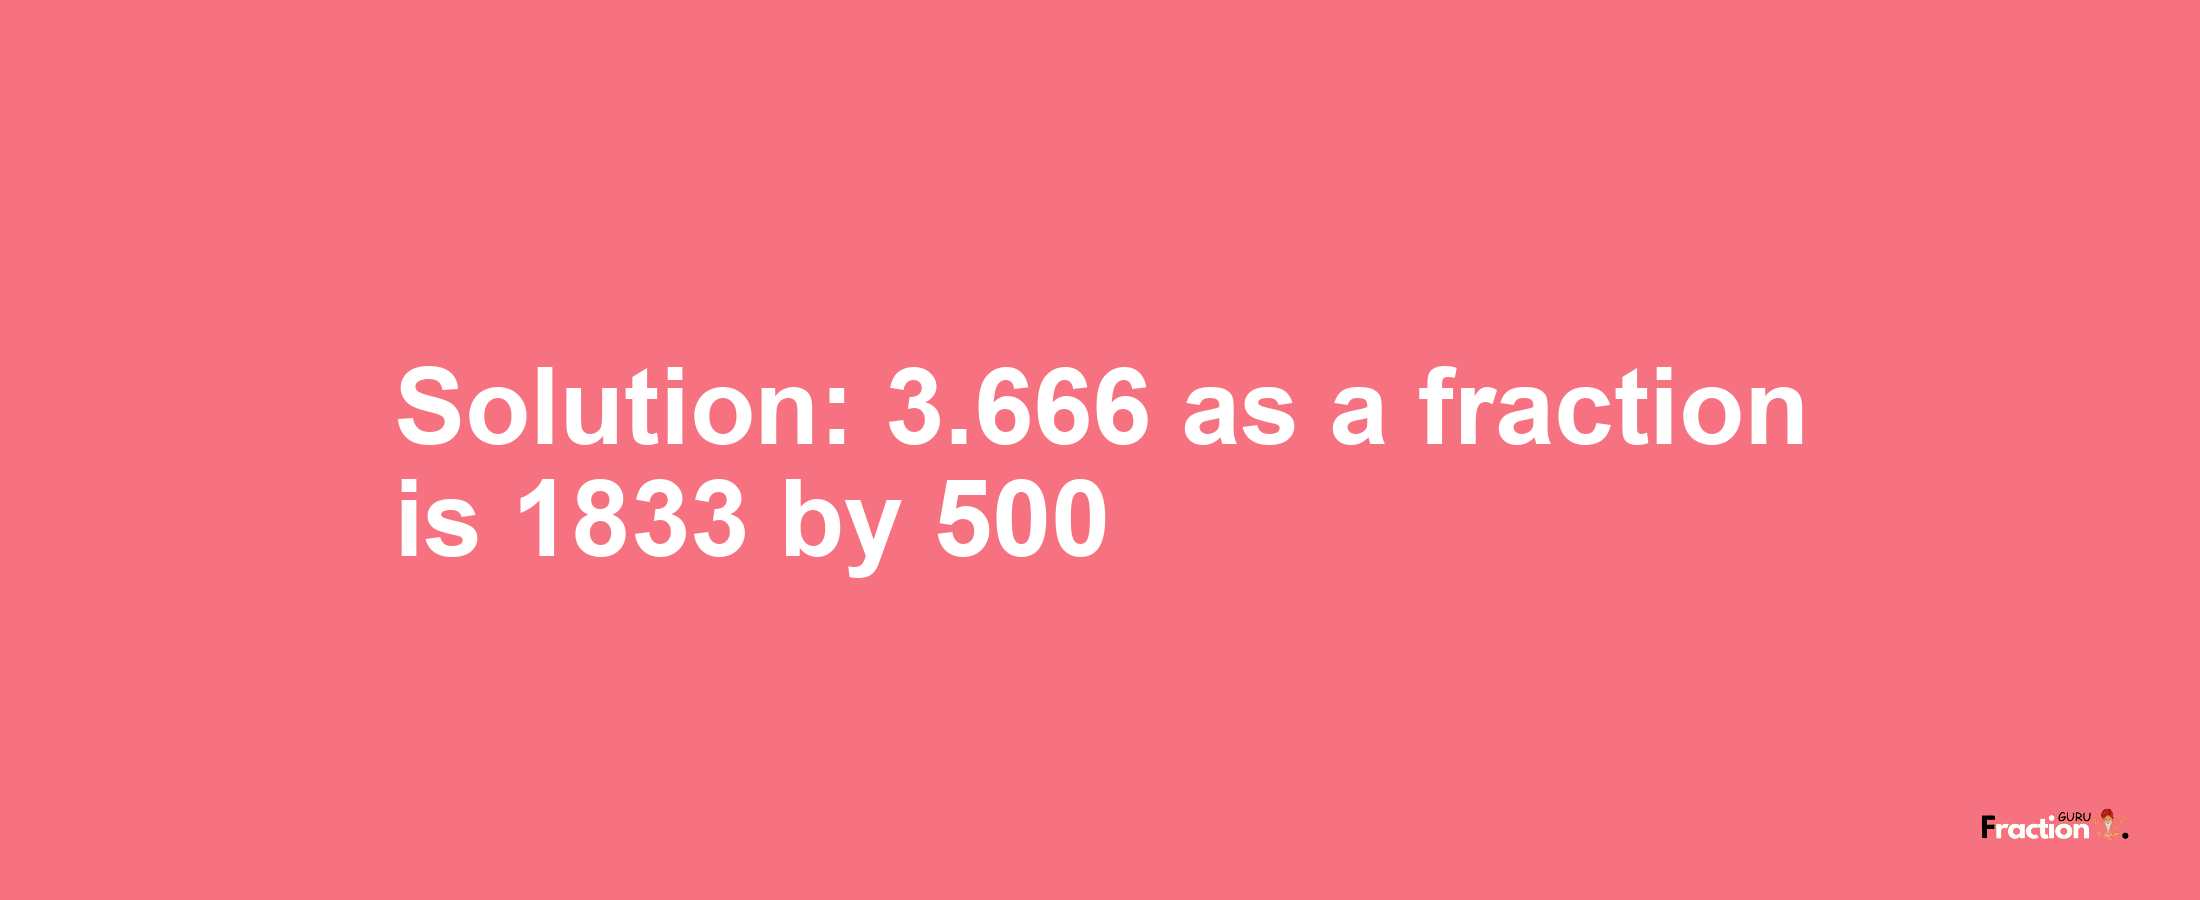 Solution:3.666 as a fraction is 1833/500